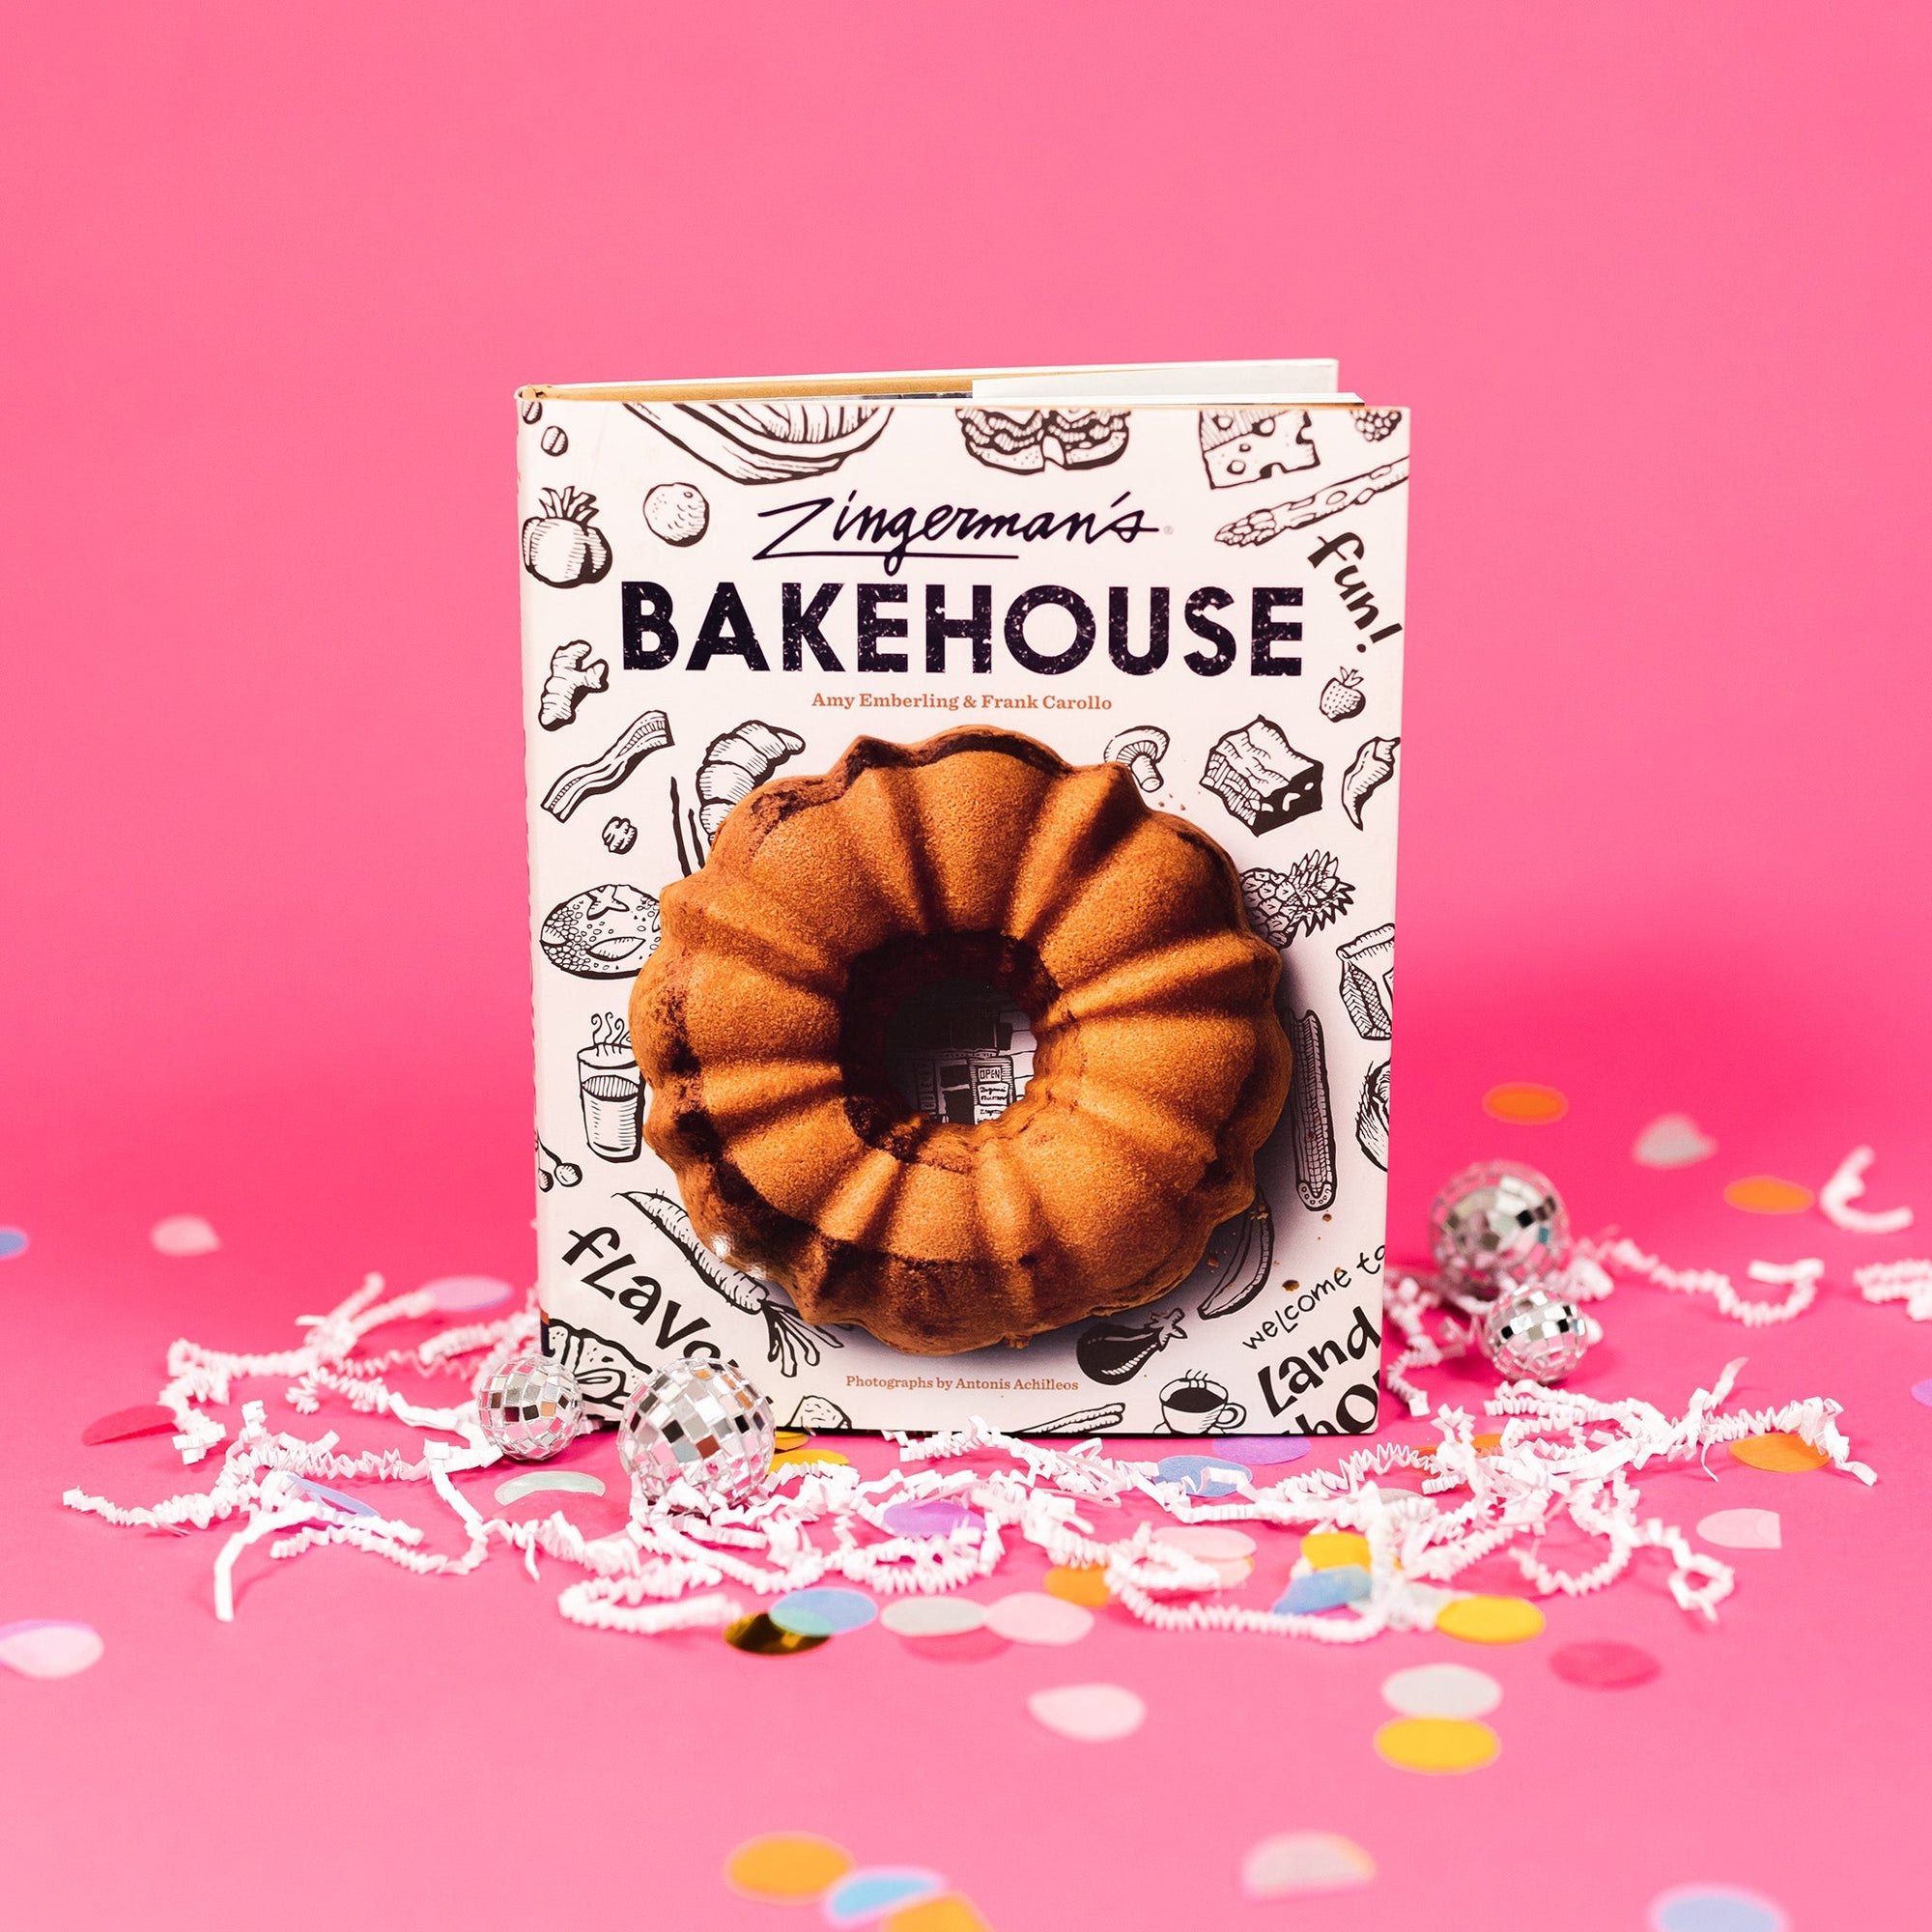 On a hot pink background sits a book with white crinkle and big, colorful confetti scattered around. There are mini disco balls. This cookbook says "Zingerman's Bakehouse" in a dark purple font. The cover has black illustrations of fruit, vegetables, bacon, drinks and a photo of a bundt cake.